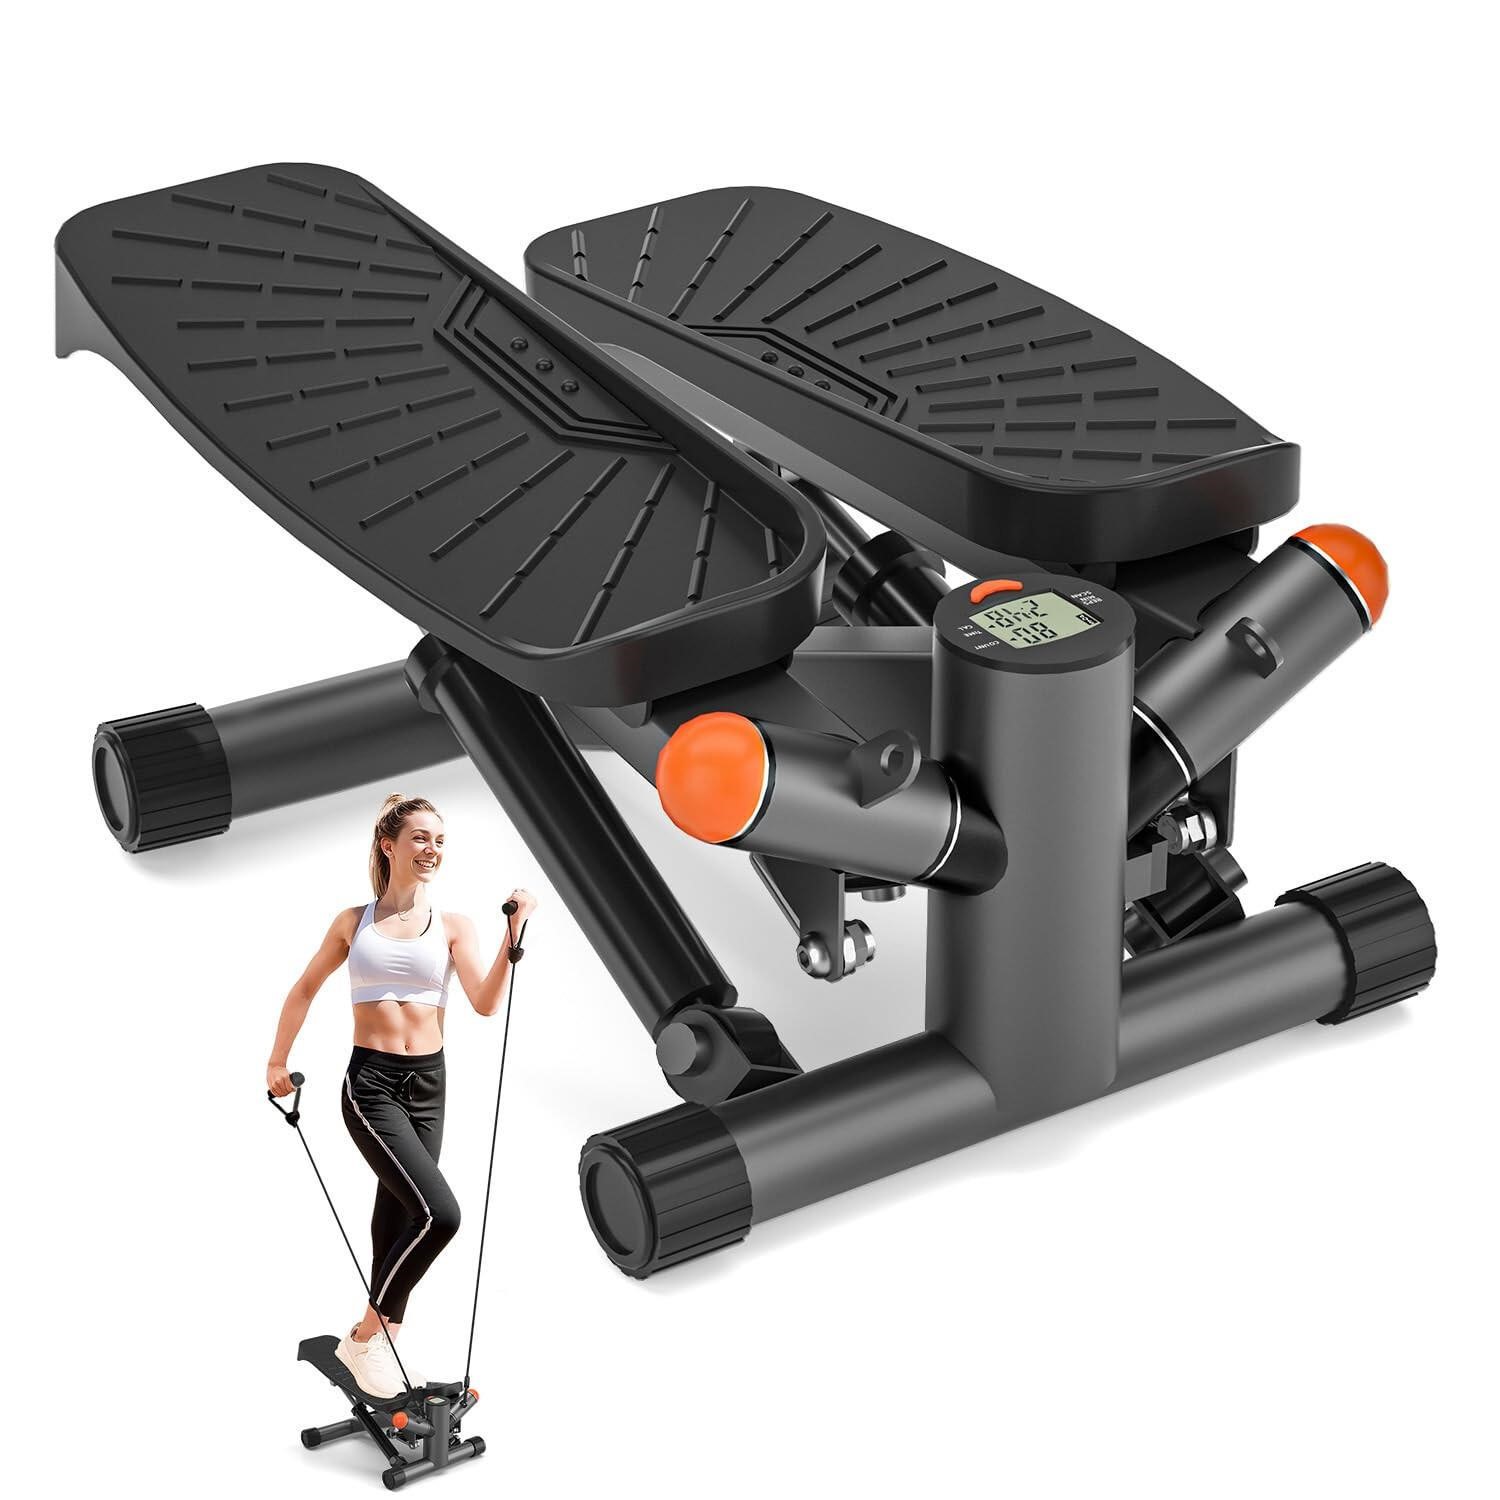 ACFITI Steppers for Exercise at Home,Adjustable He